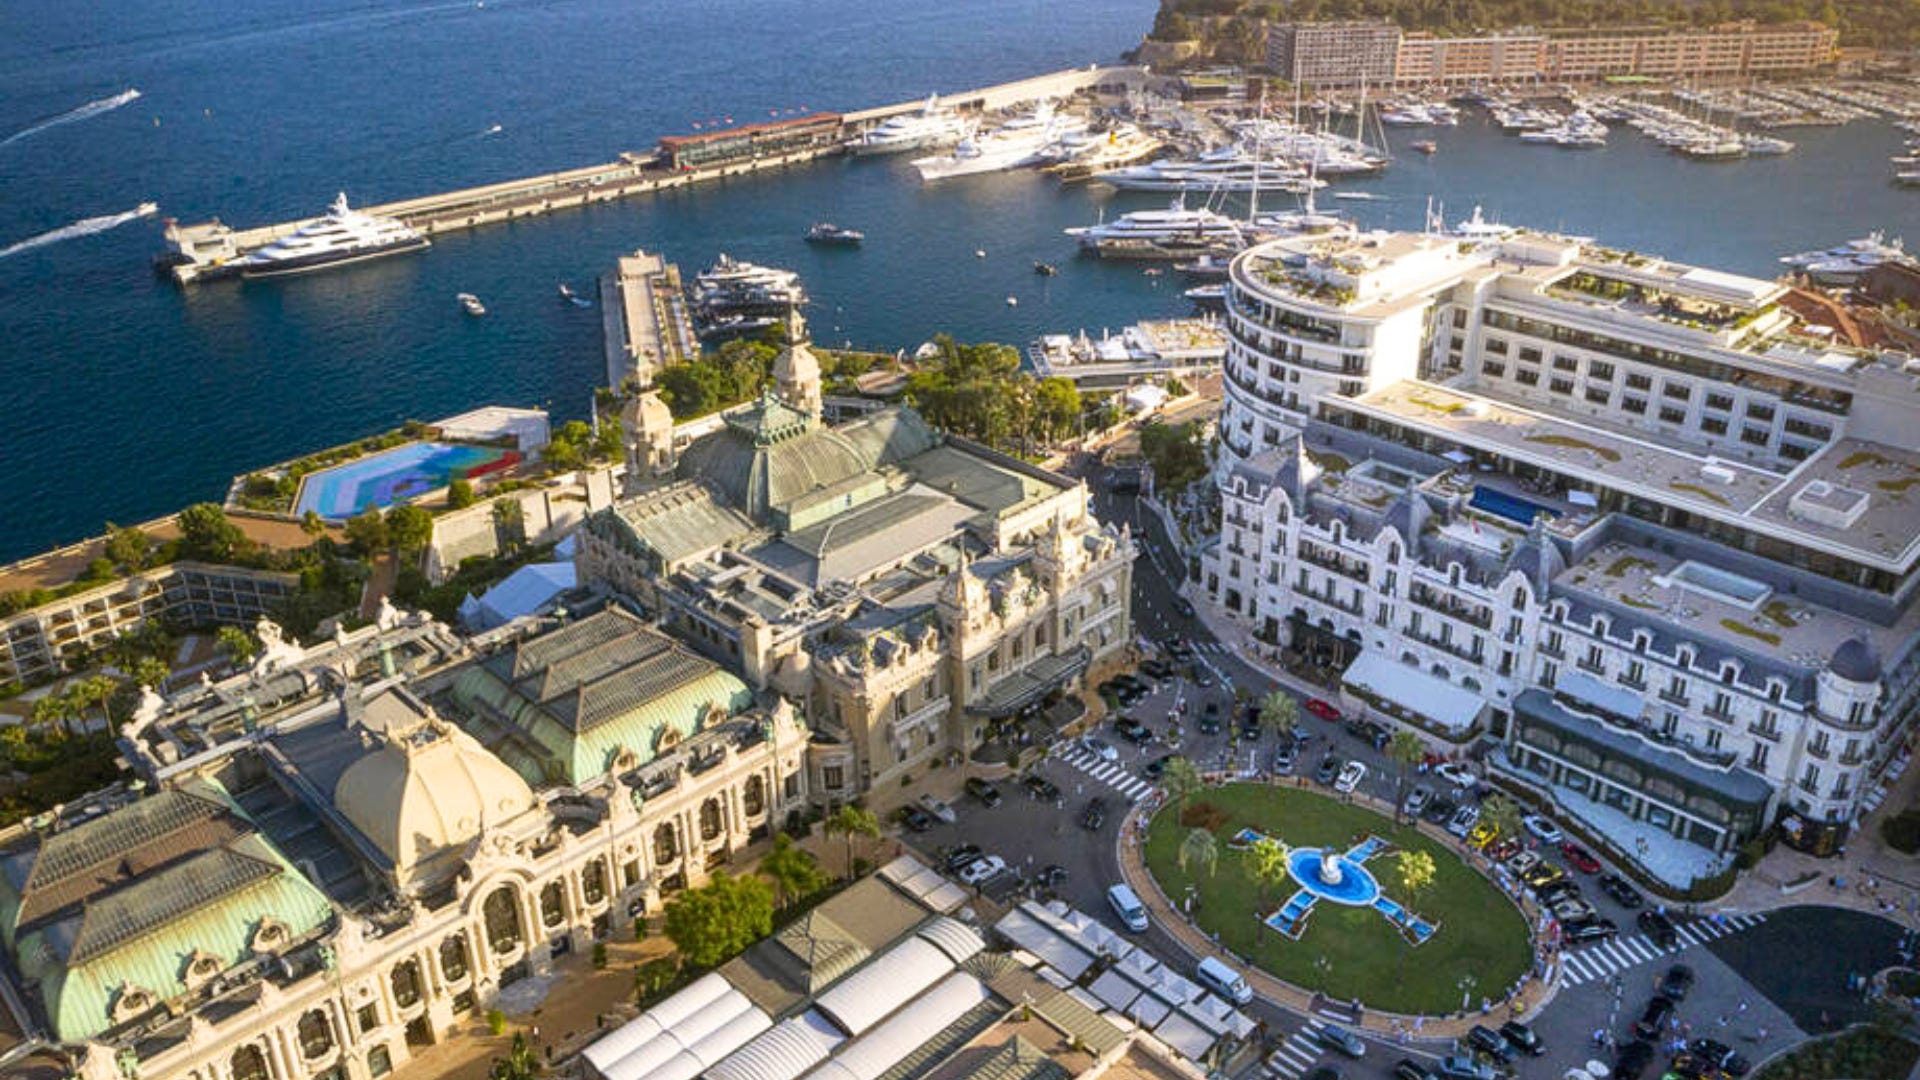 Monaco GP: Everything You Need To Know About The Business Behind